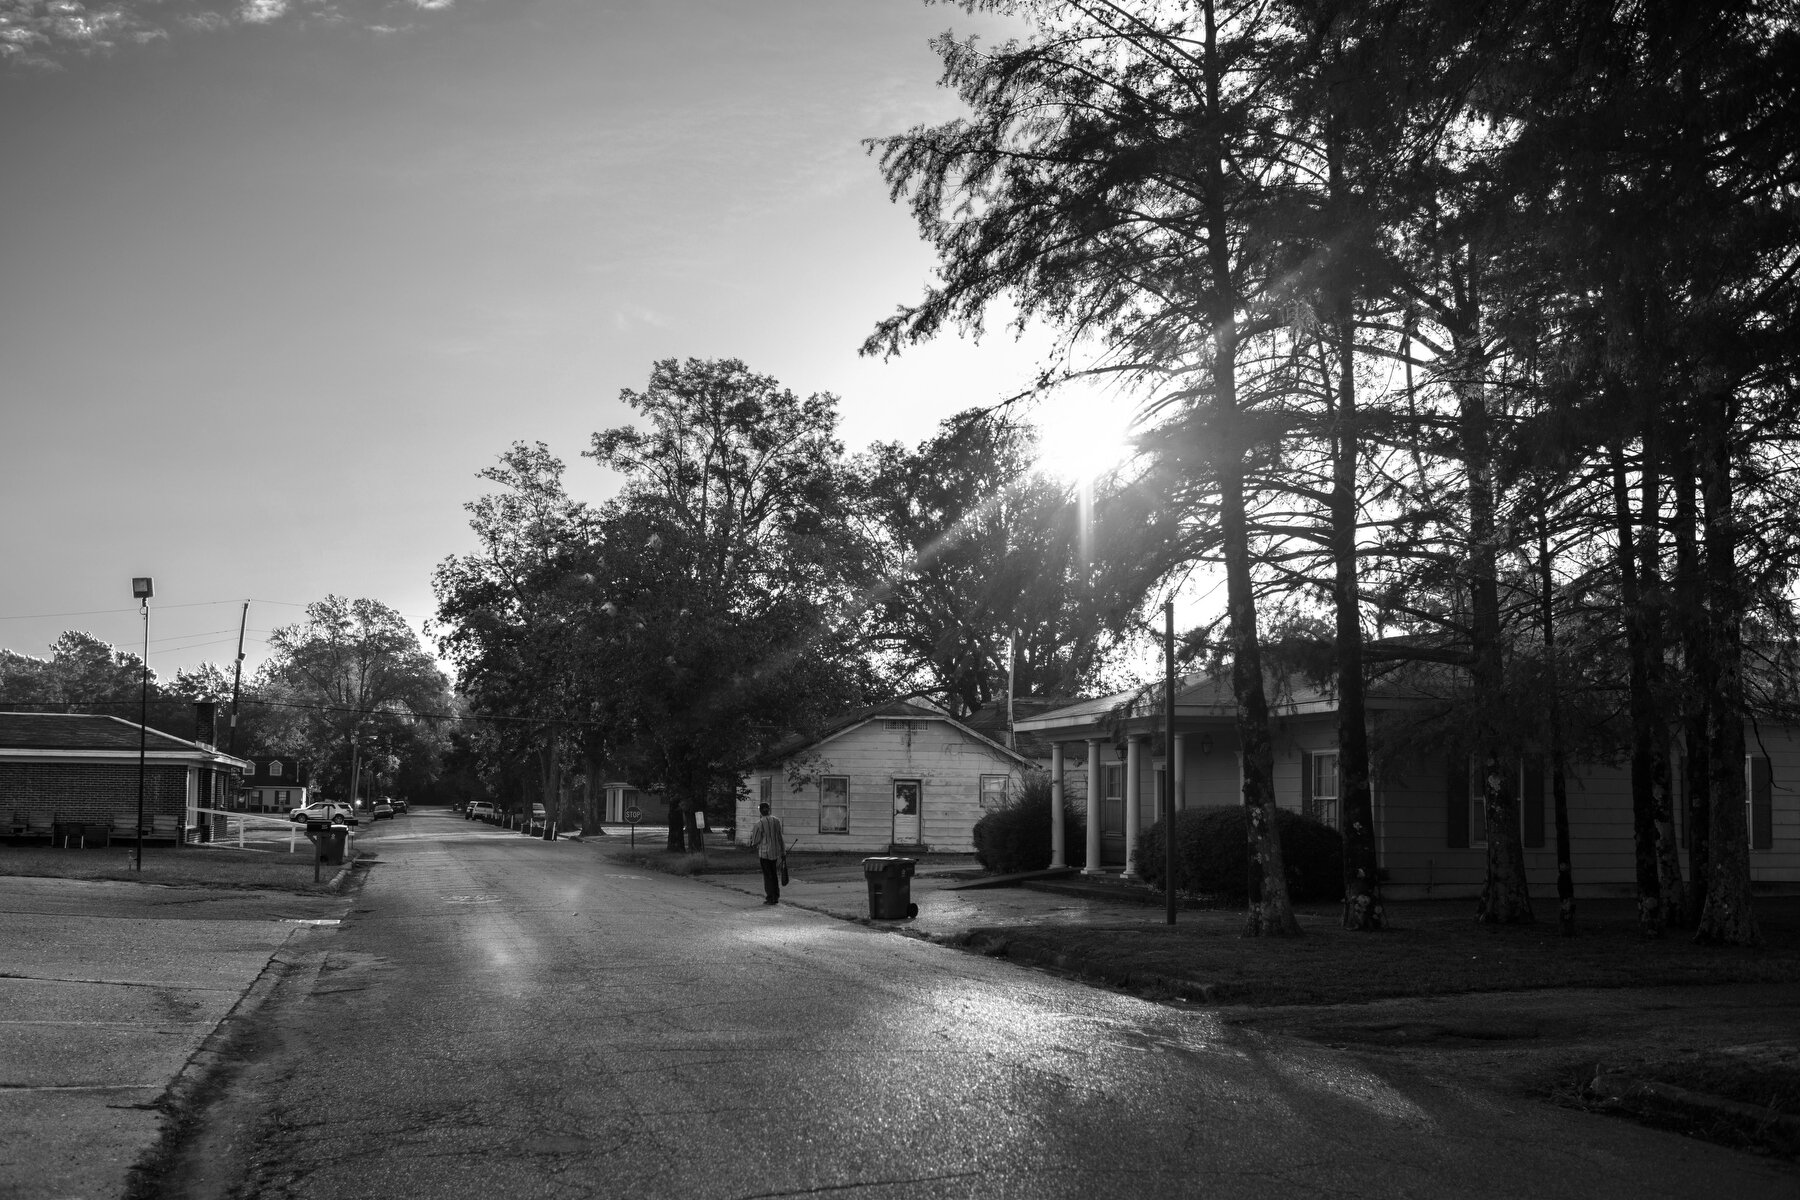  A man walks down the street in the city of Marks, MS. 